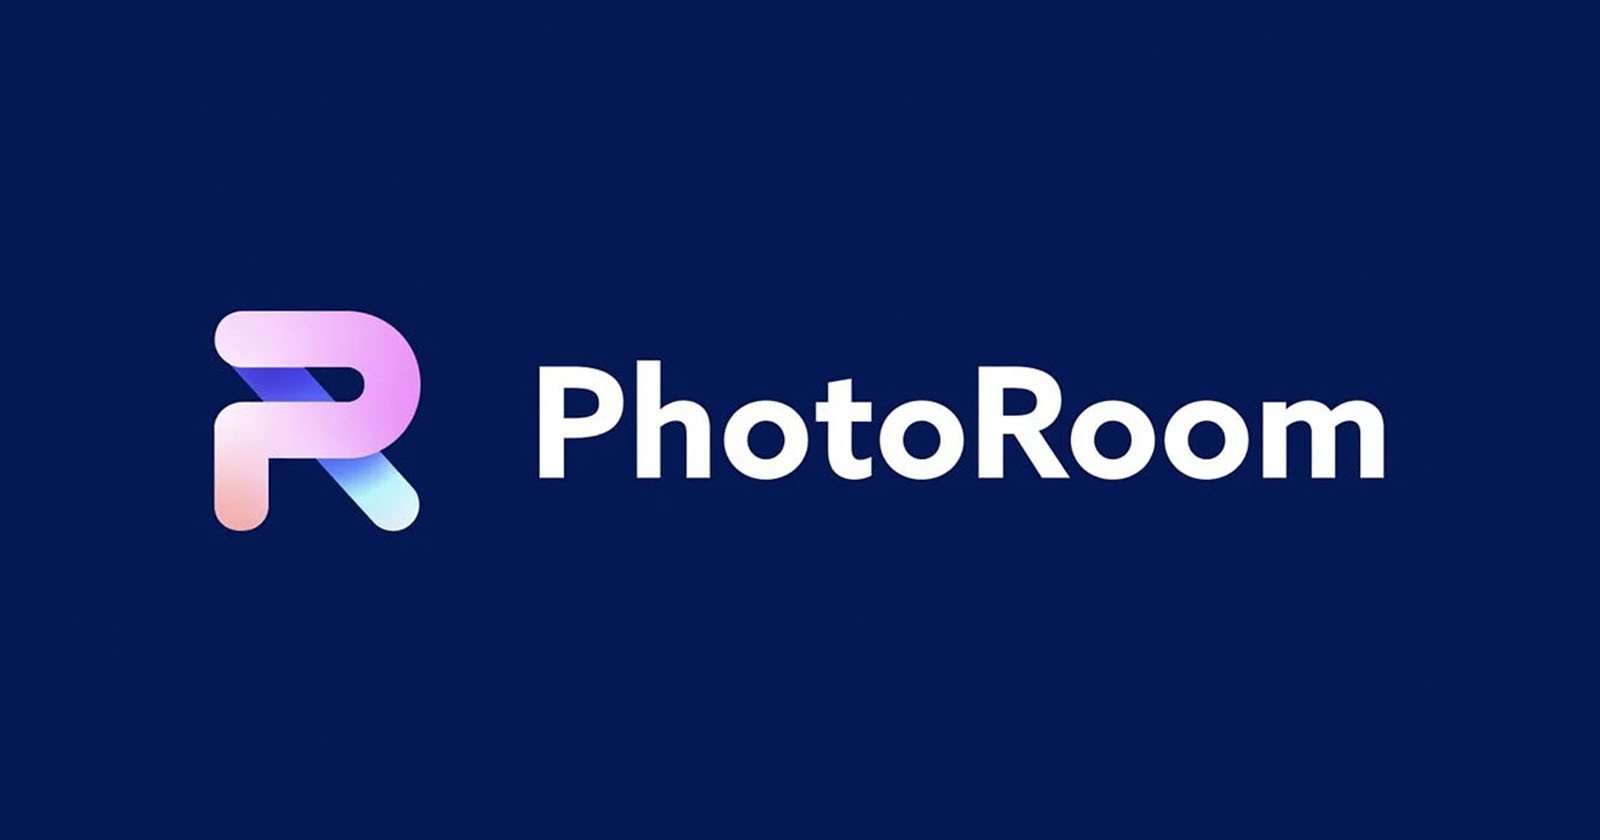 Photo Editing App That Removes Backgrounds Tops 40M Downloads